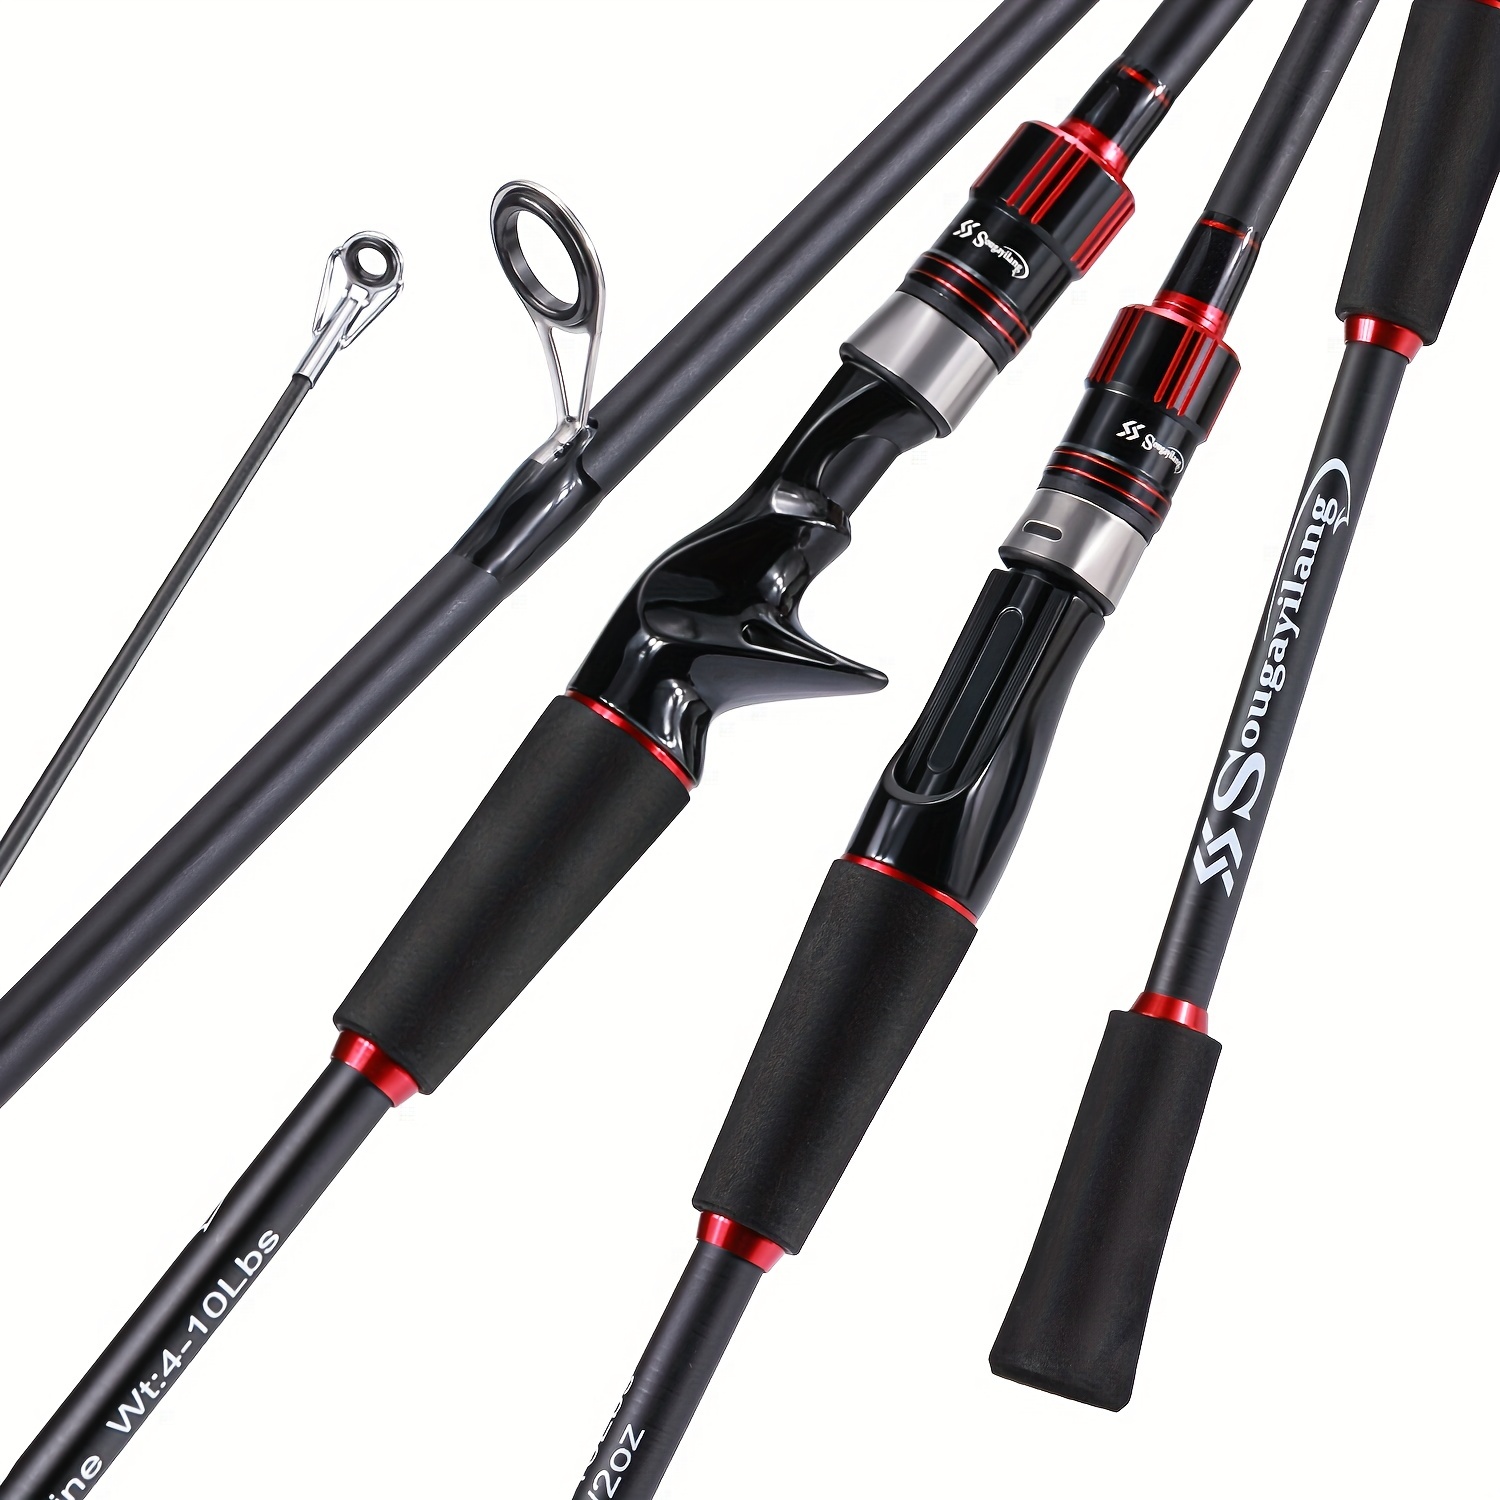 Ultralight Carbon Fishing Rod With EVA Handle - Perfect For Bass, Carp,  Saltwater & Freshwater Fishing!